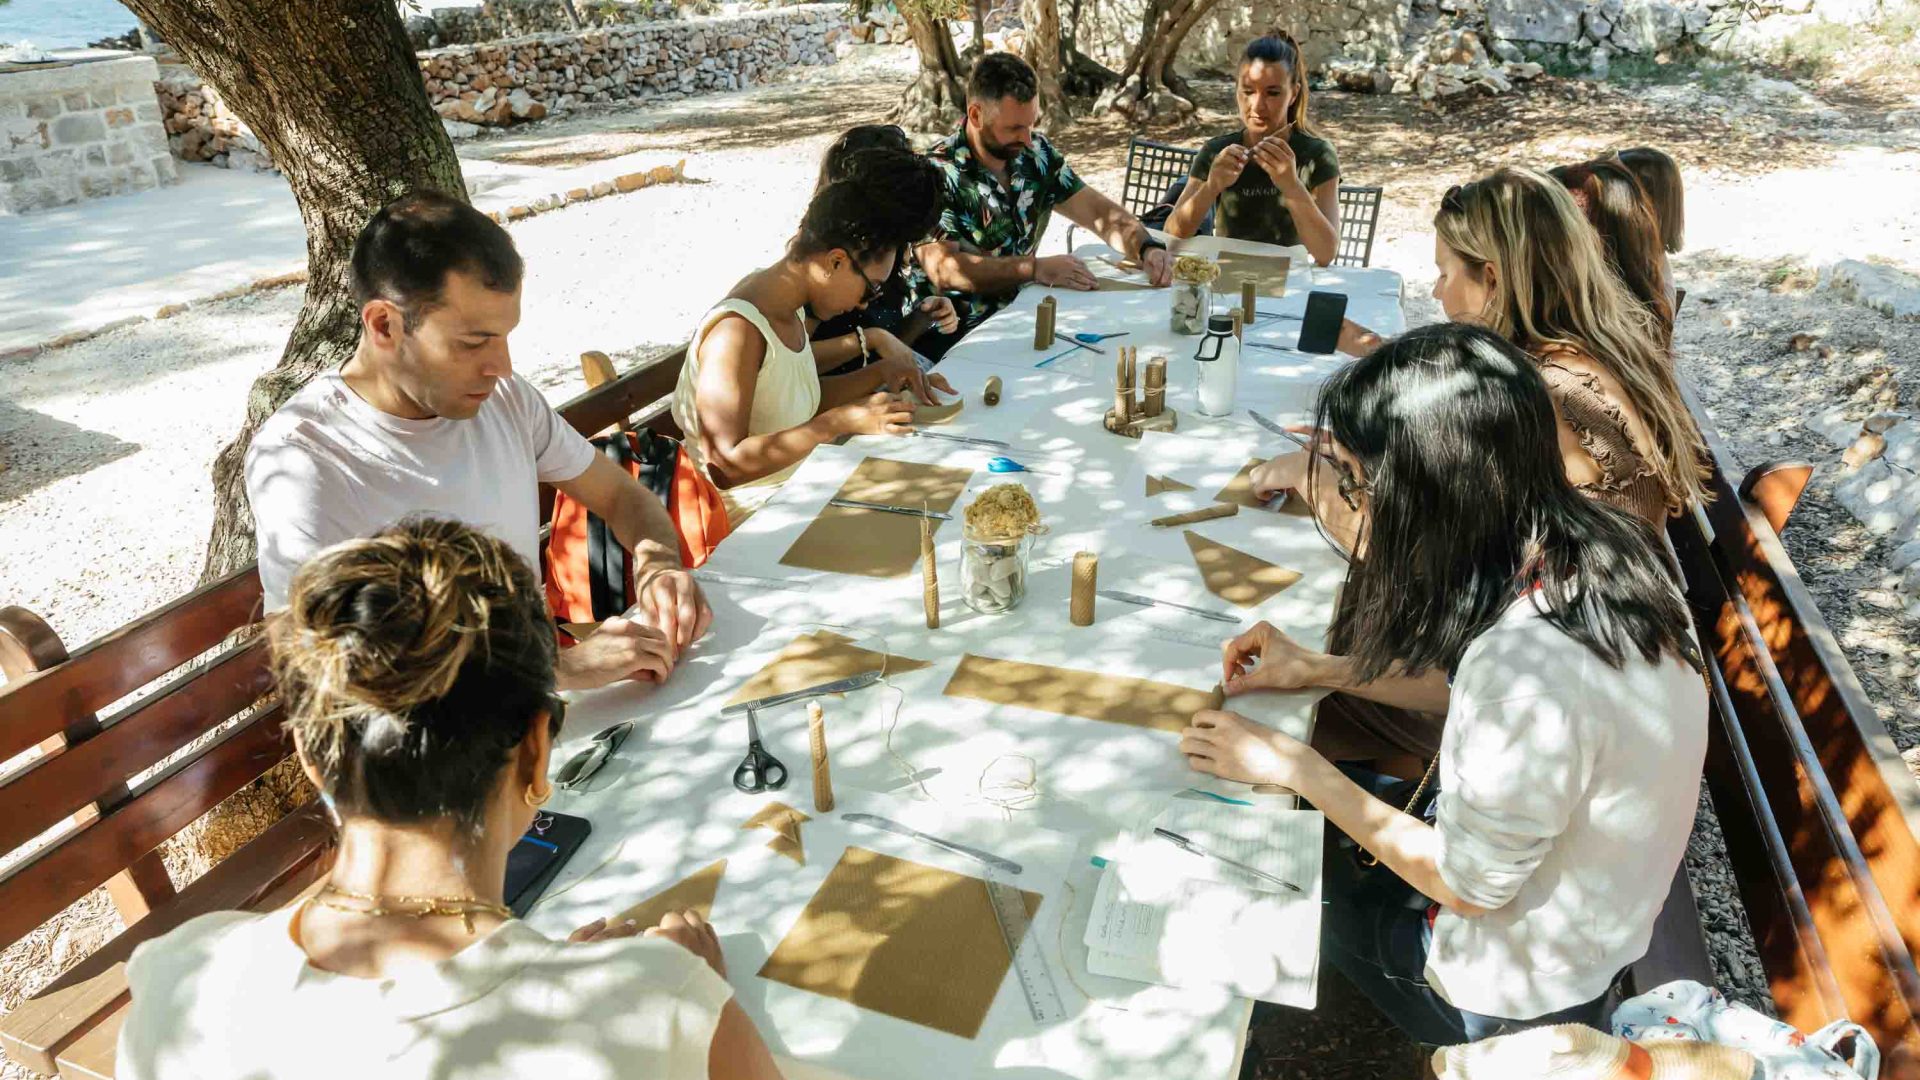 A group takes part in candle making.